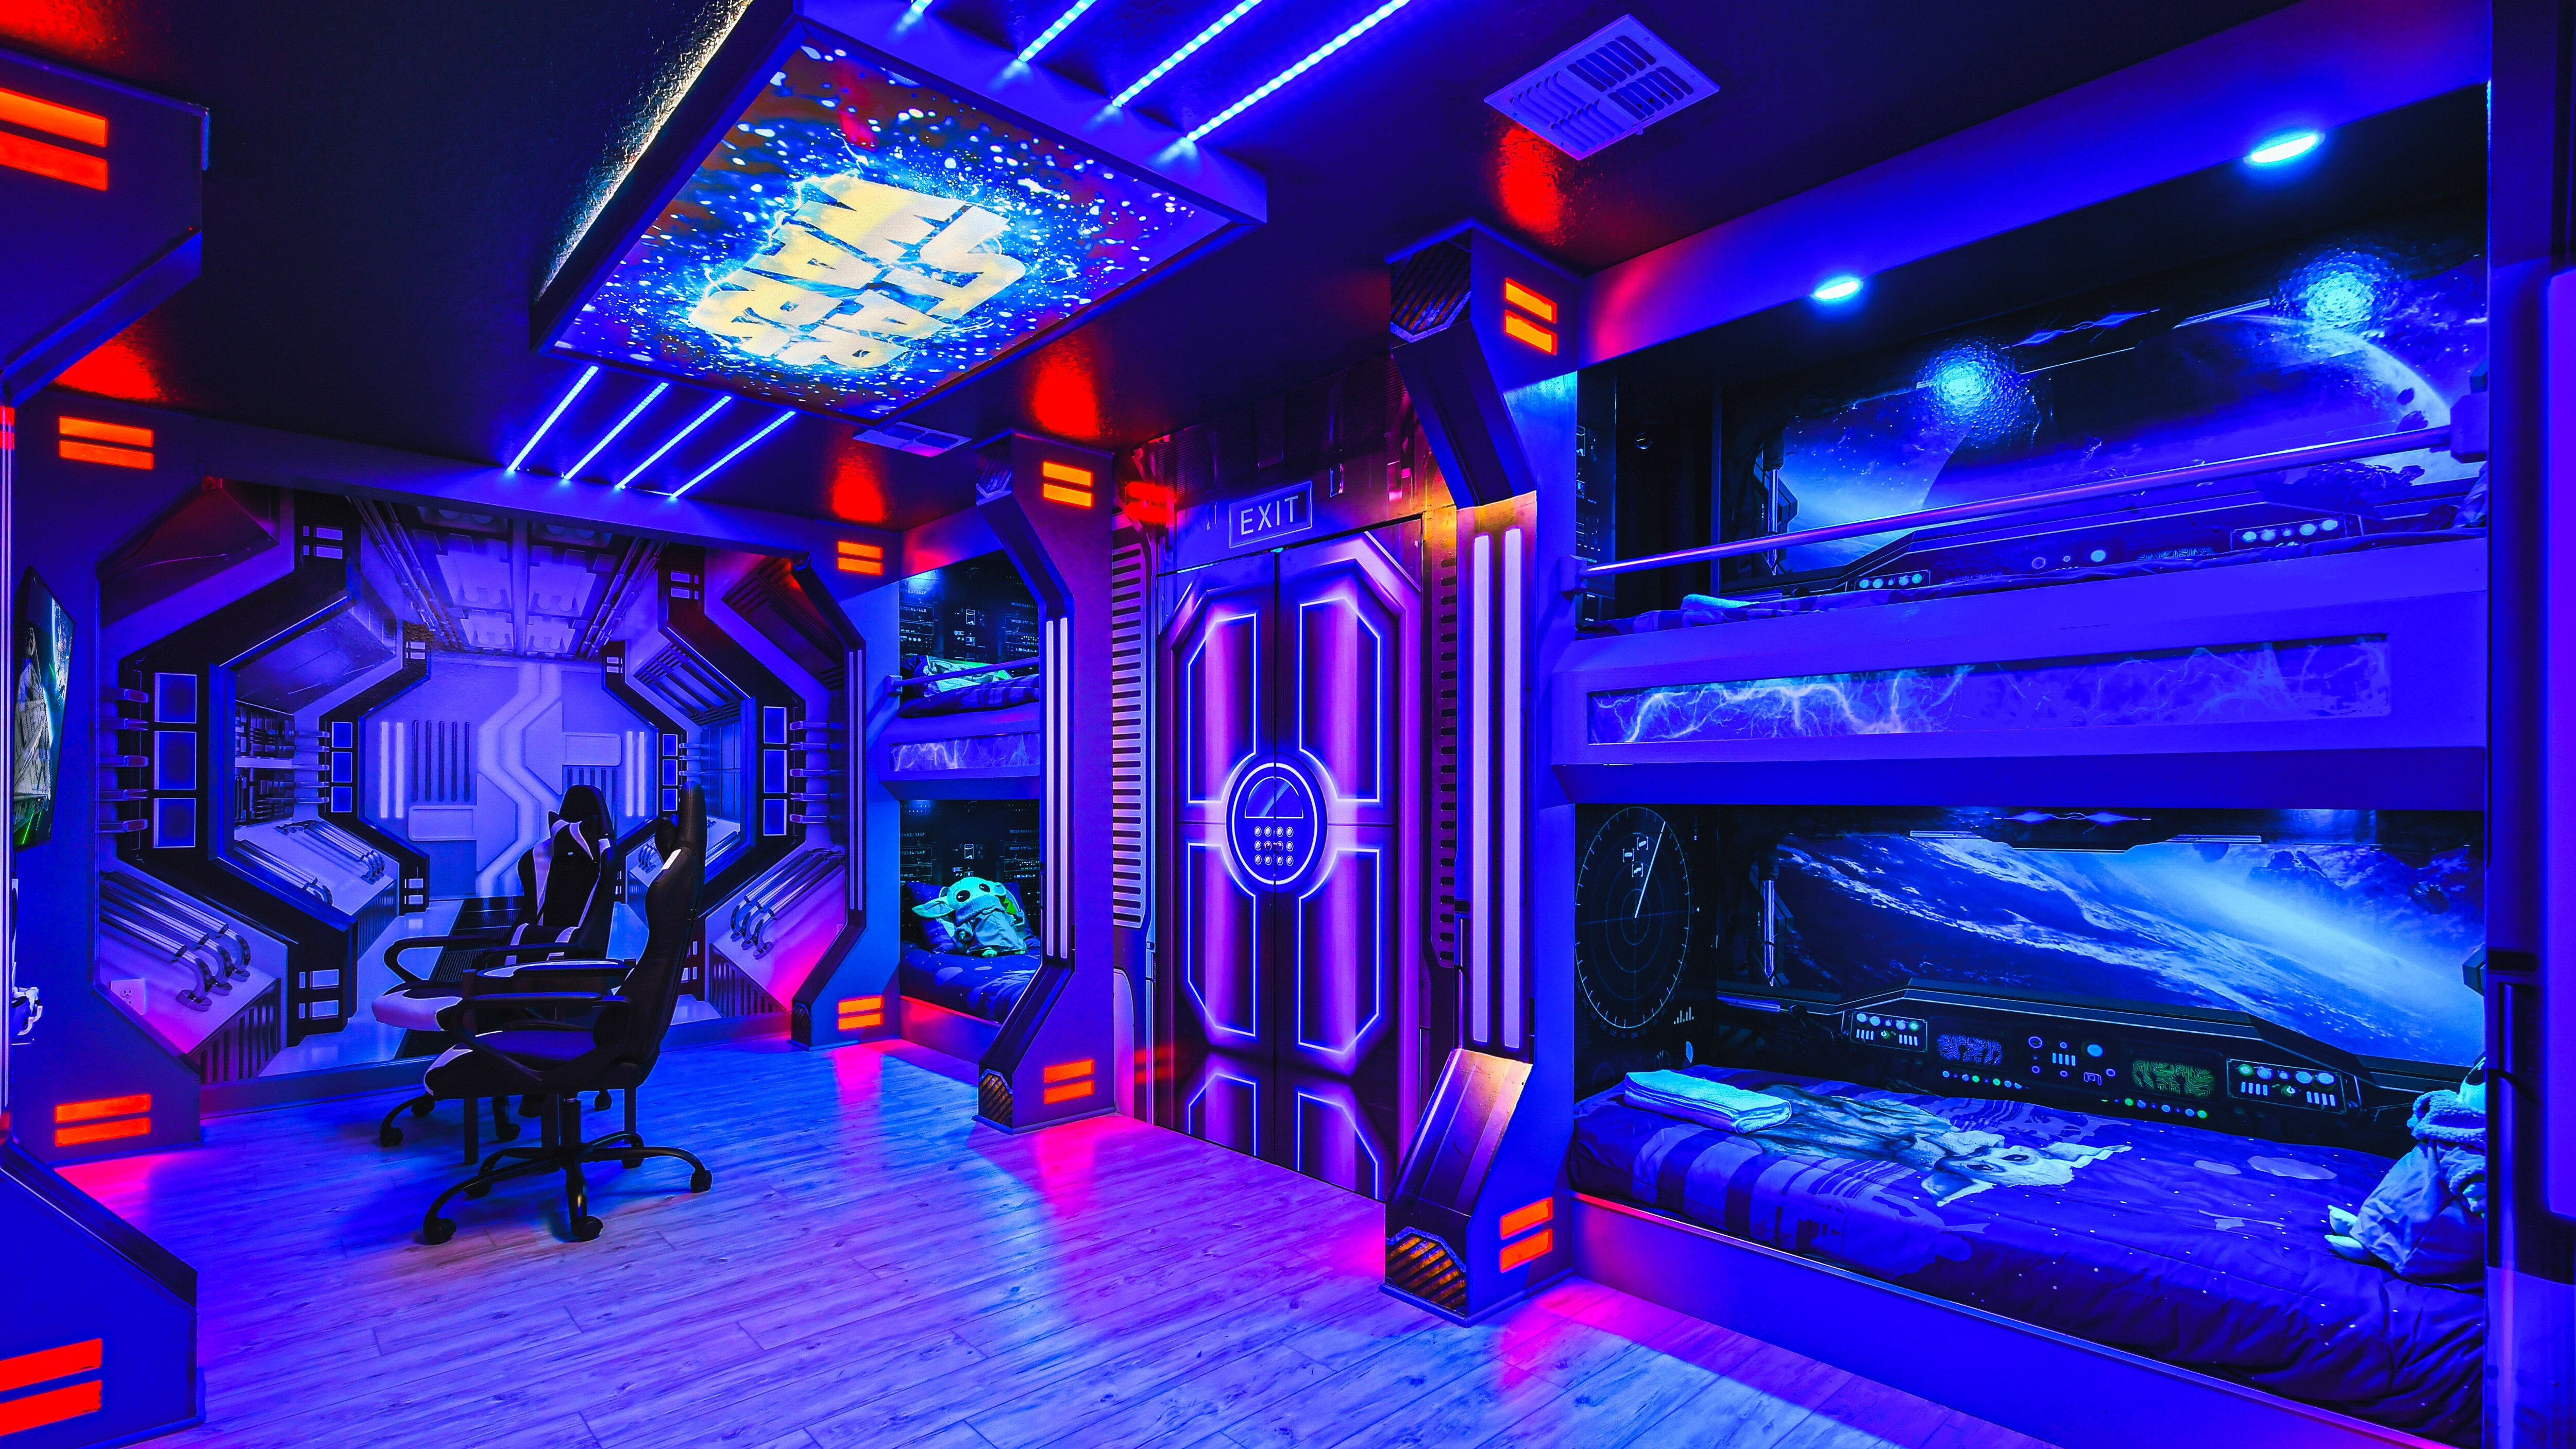 Kids will have fun in this Star Wars bedroom with beautiful lights